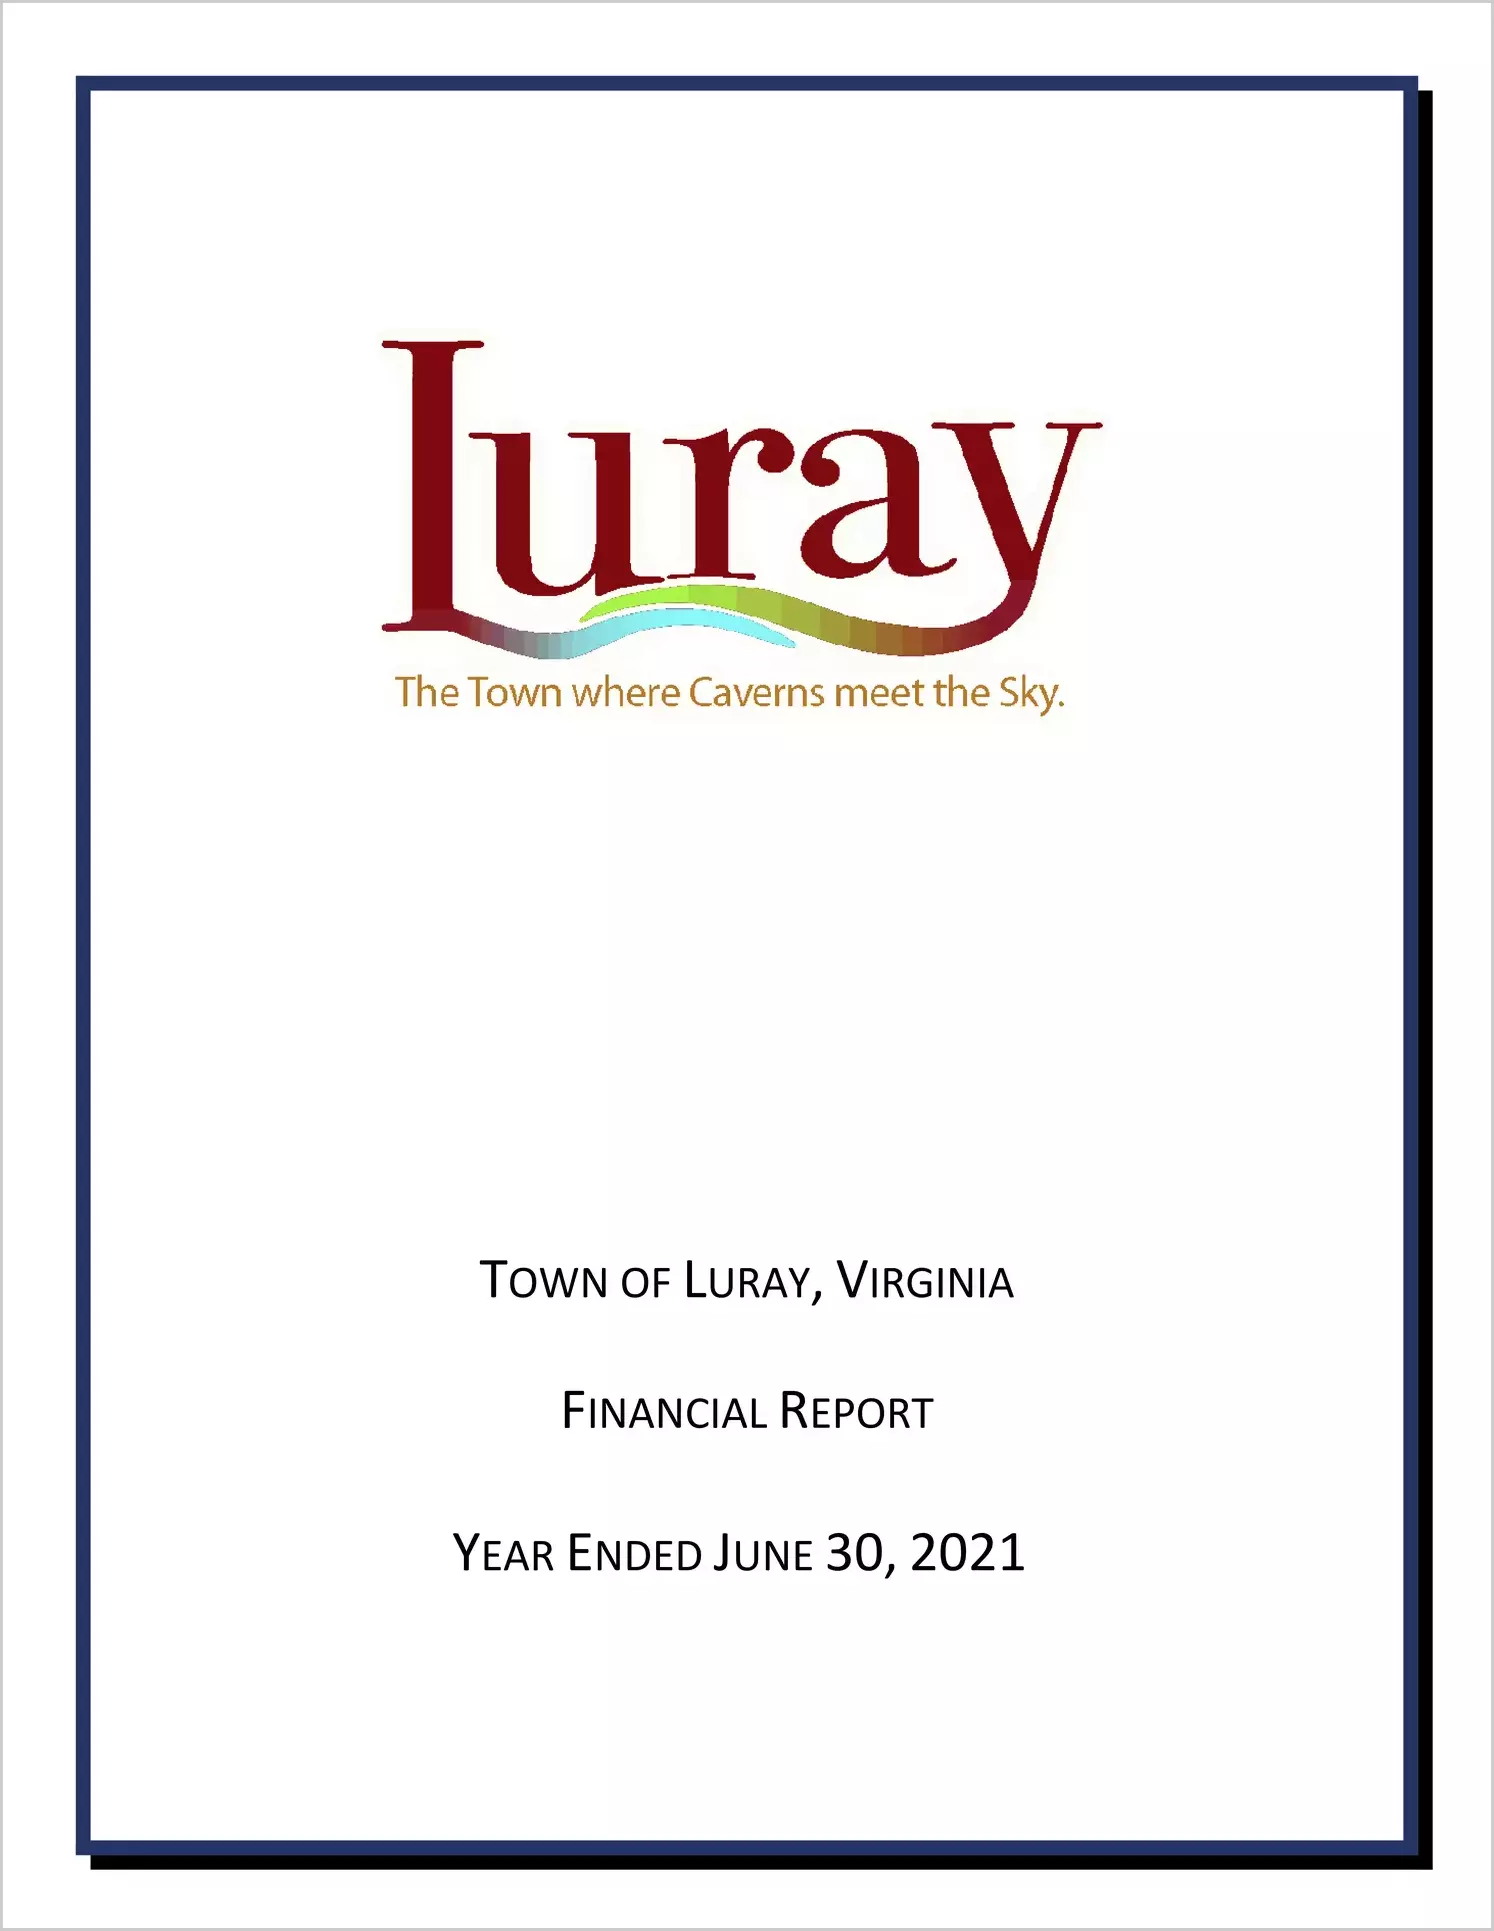 2021 Annual Financial Report for Town of Luray